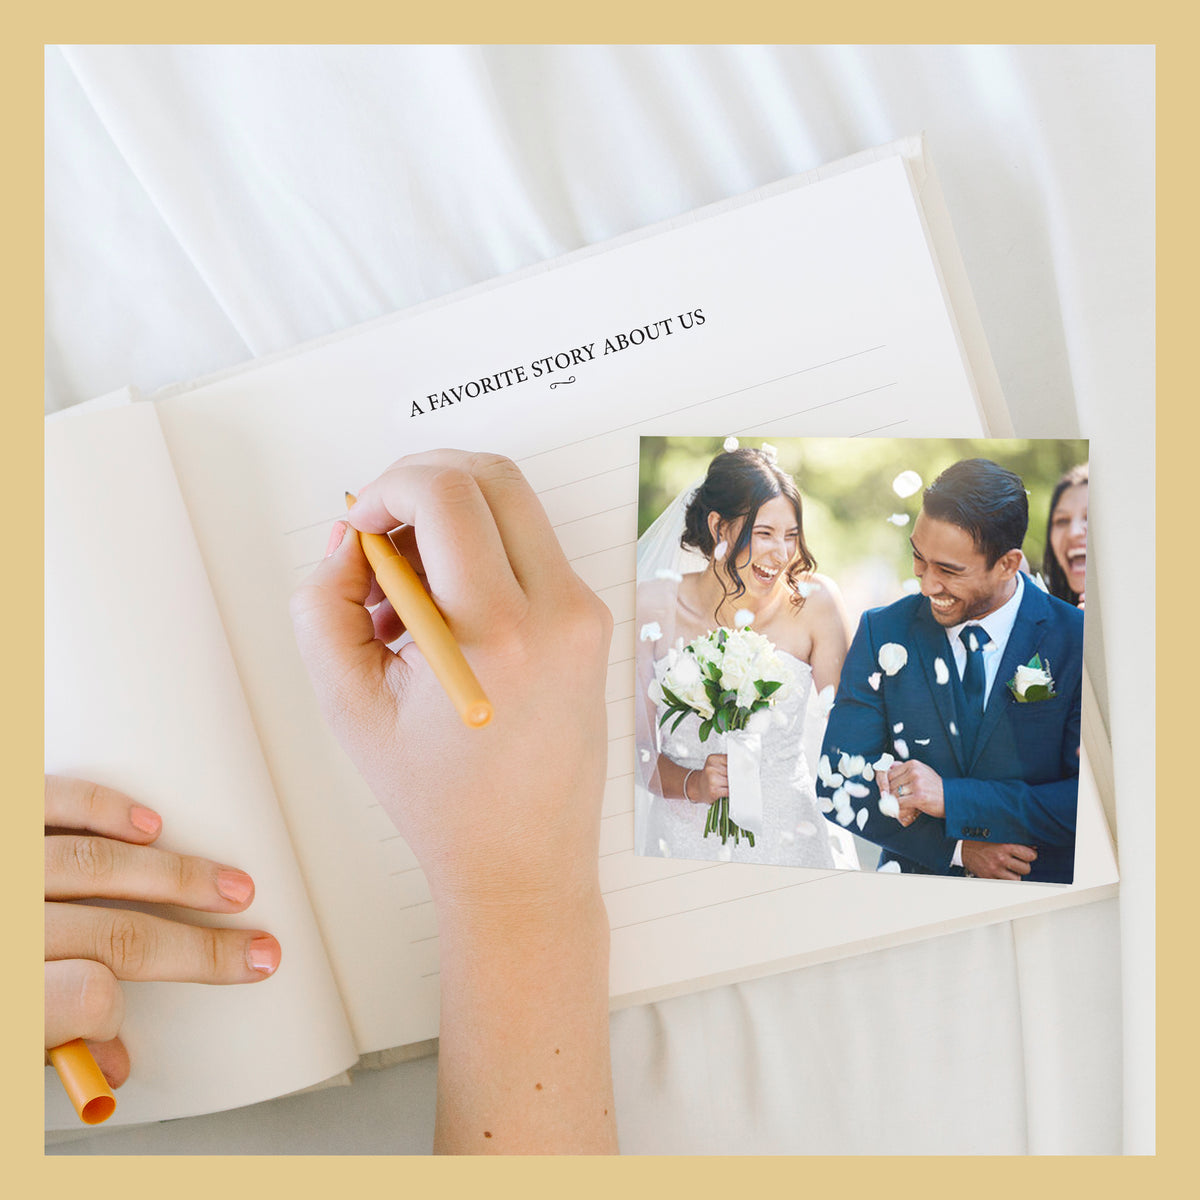 Anniversary Journal | Printed Cover: Tie The Knot | Available Personalized